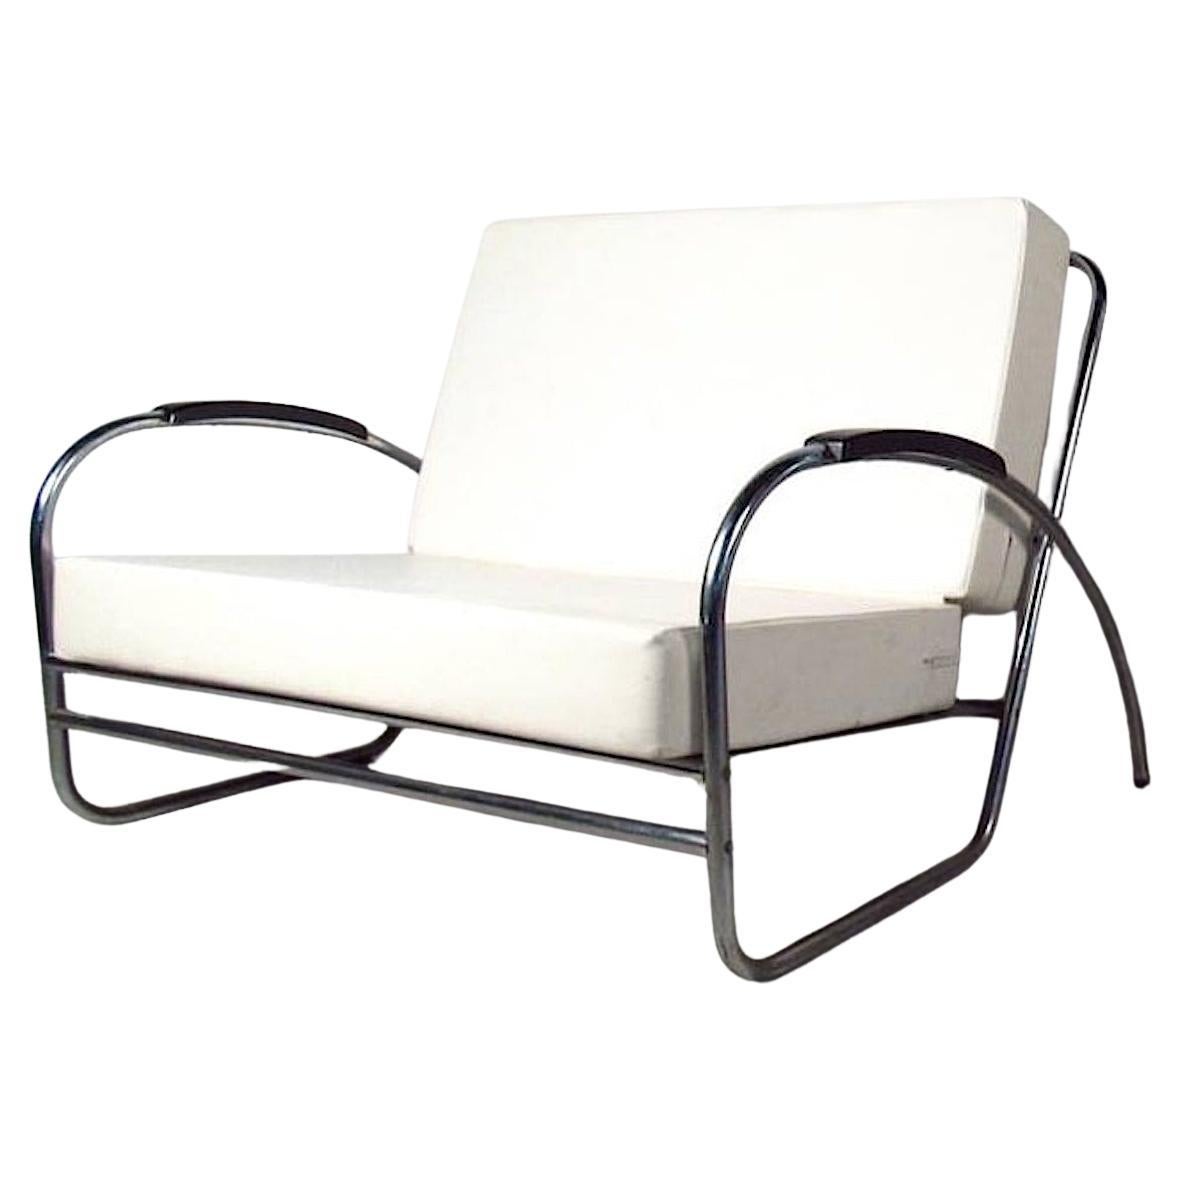 Oversized Lounge Chair by Royal Metal